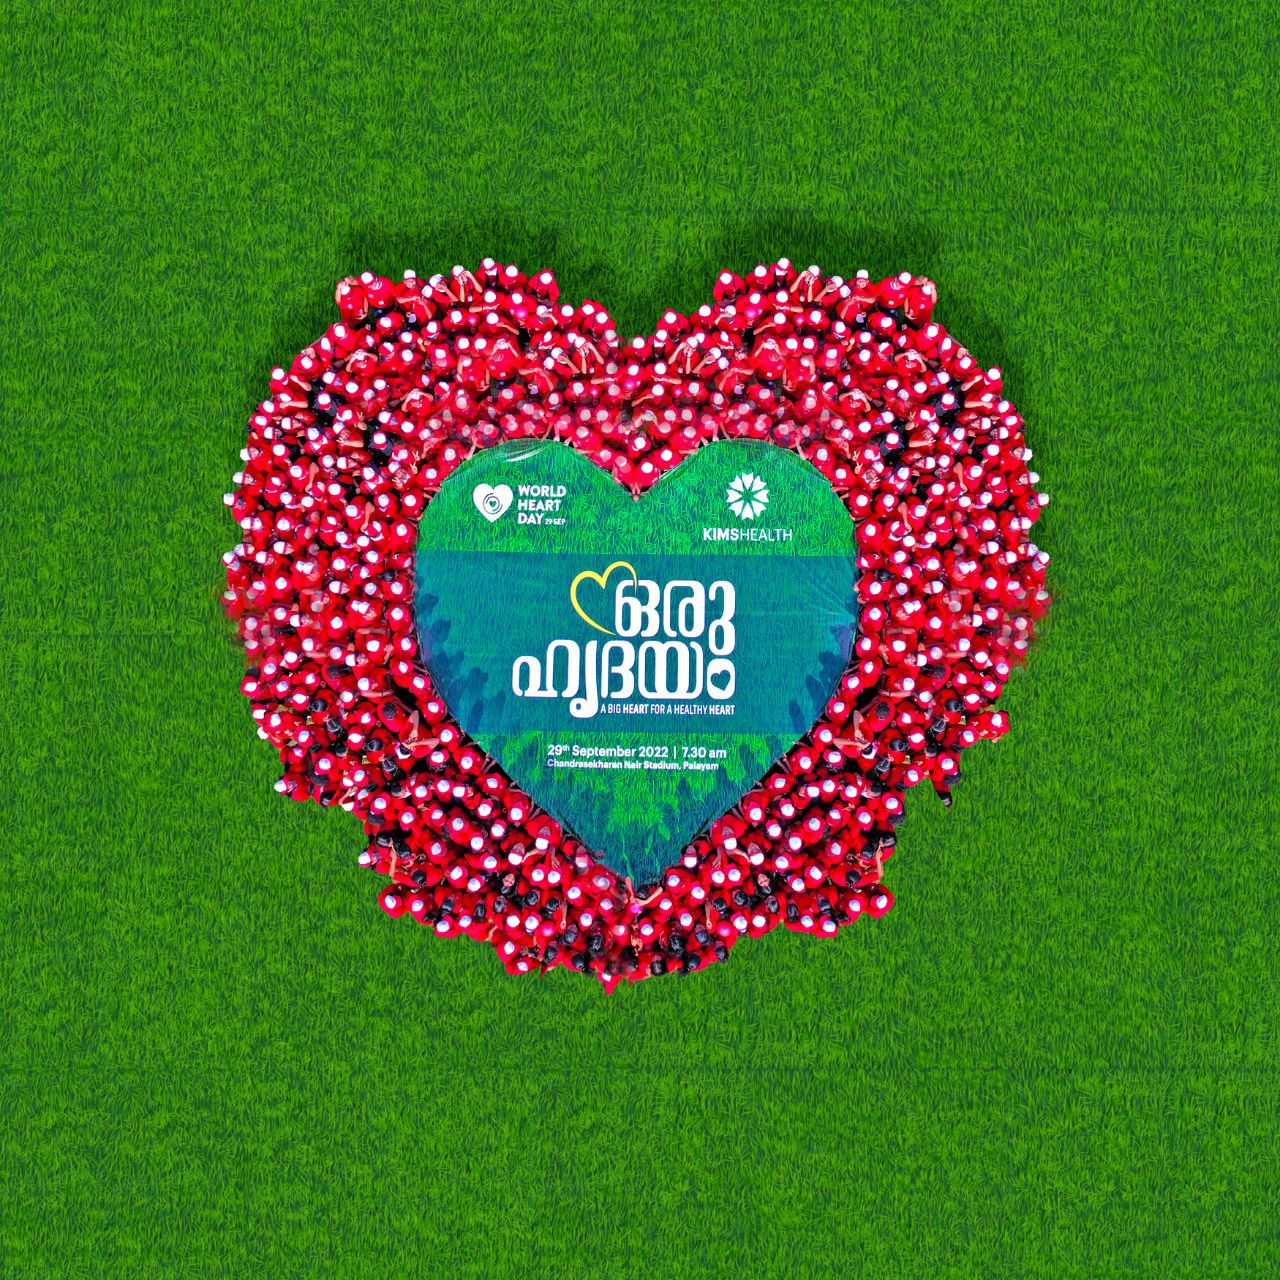 Capital turns into 'one heart' on World Heart Day;  KIMSHEALTH lines up 500 children in heart shape